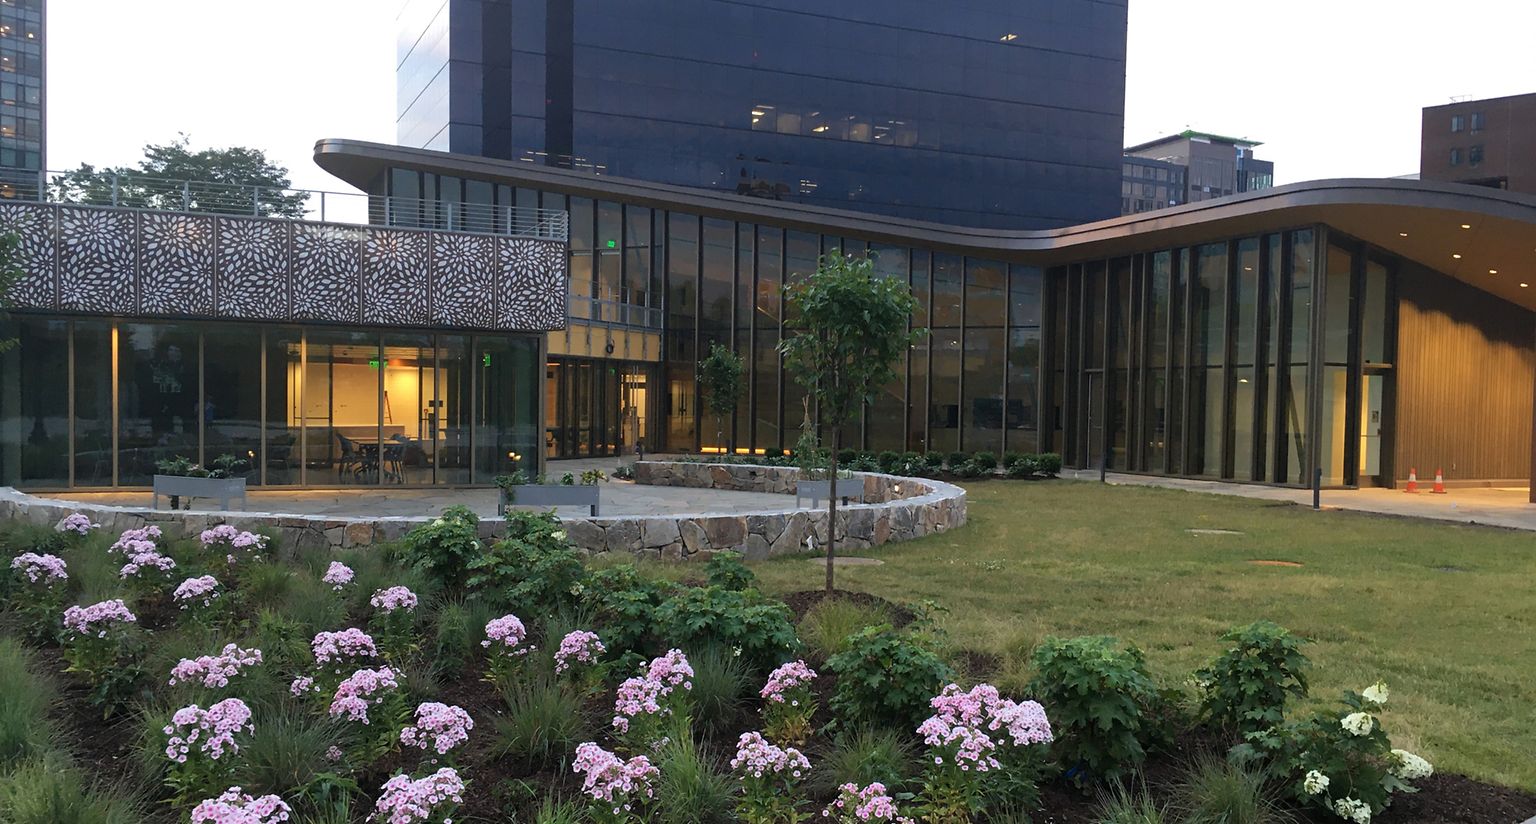 Flower bed in foreground of building with glass walls